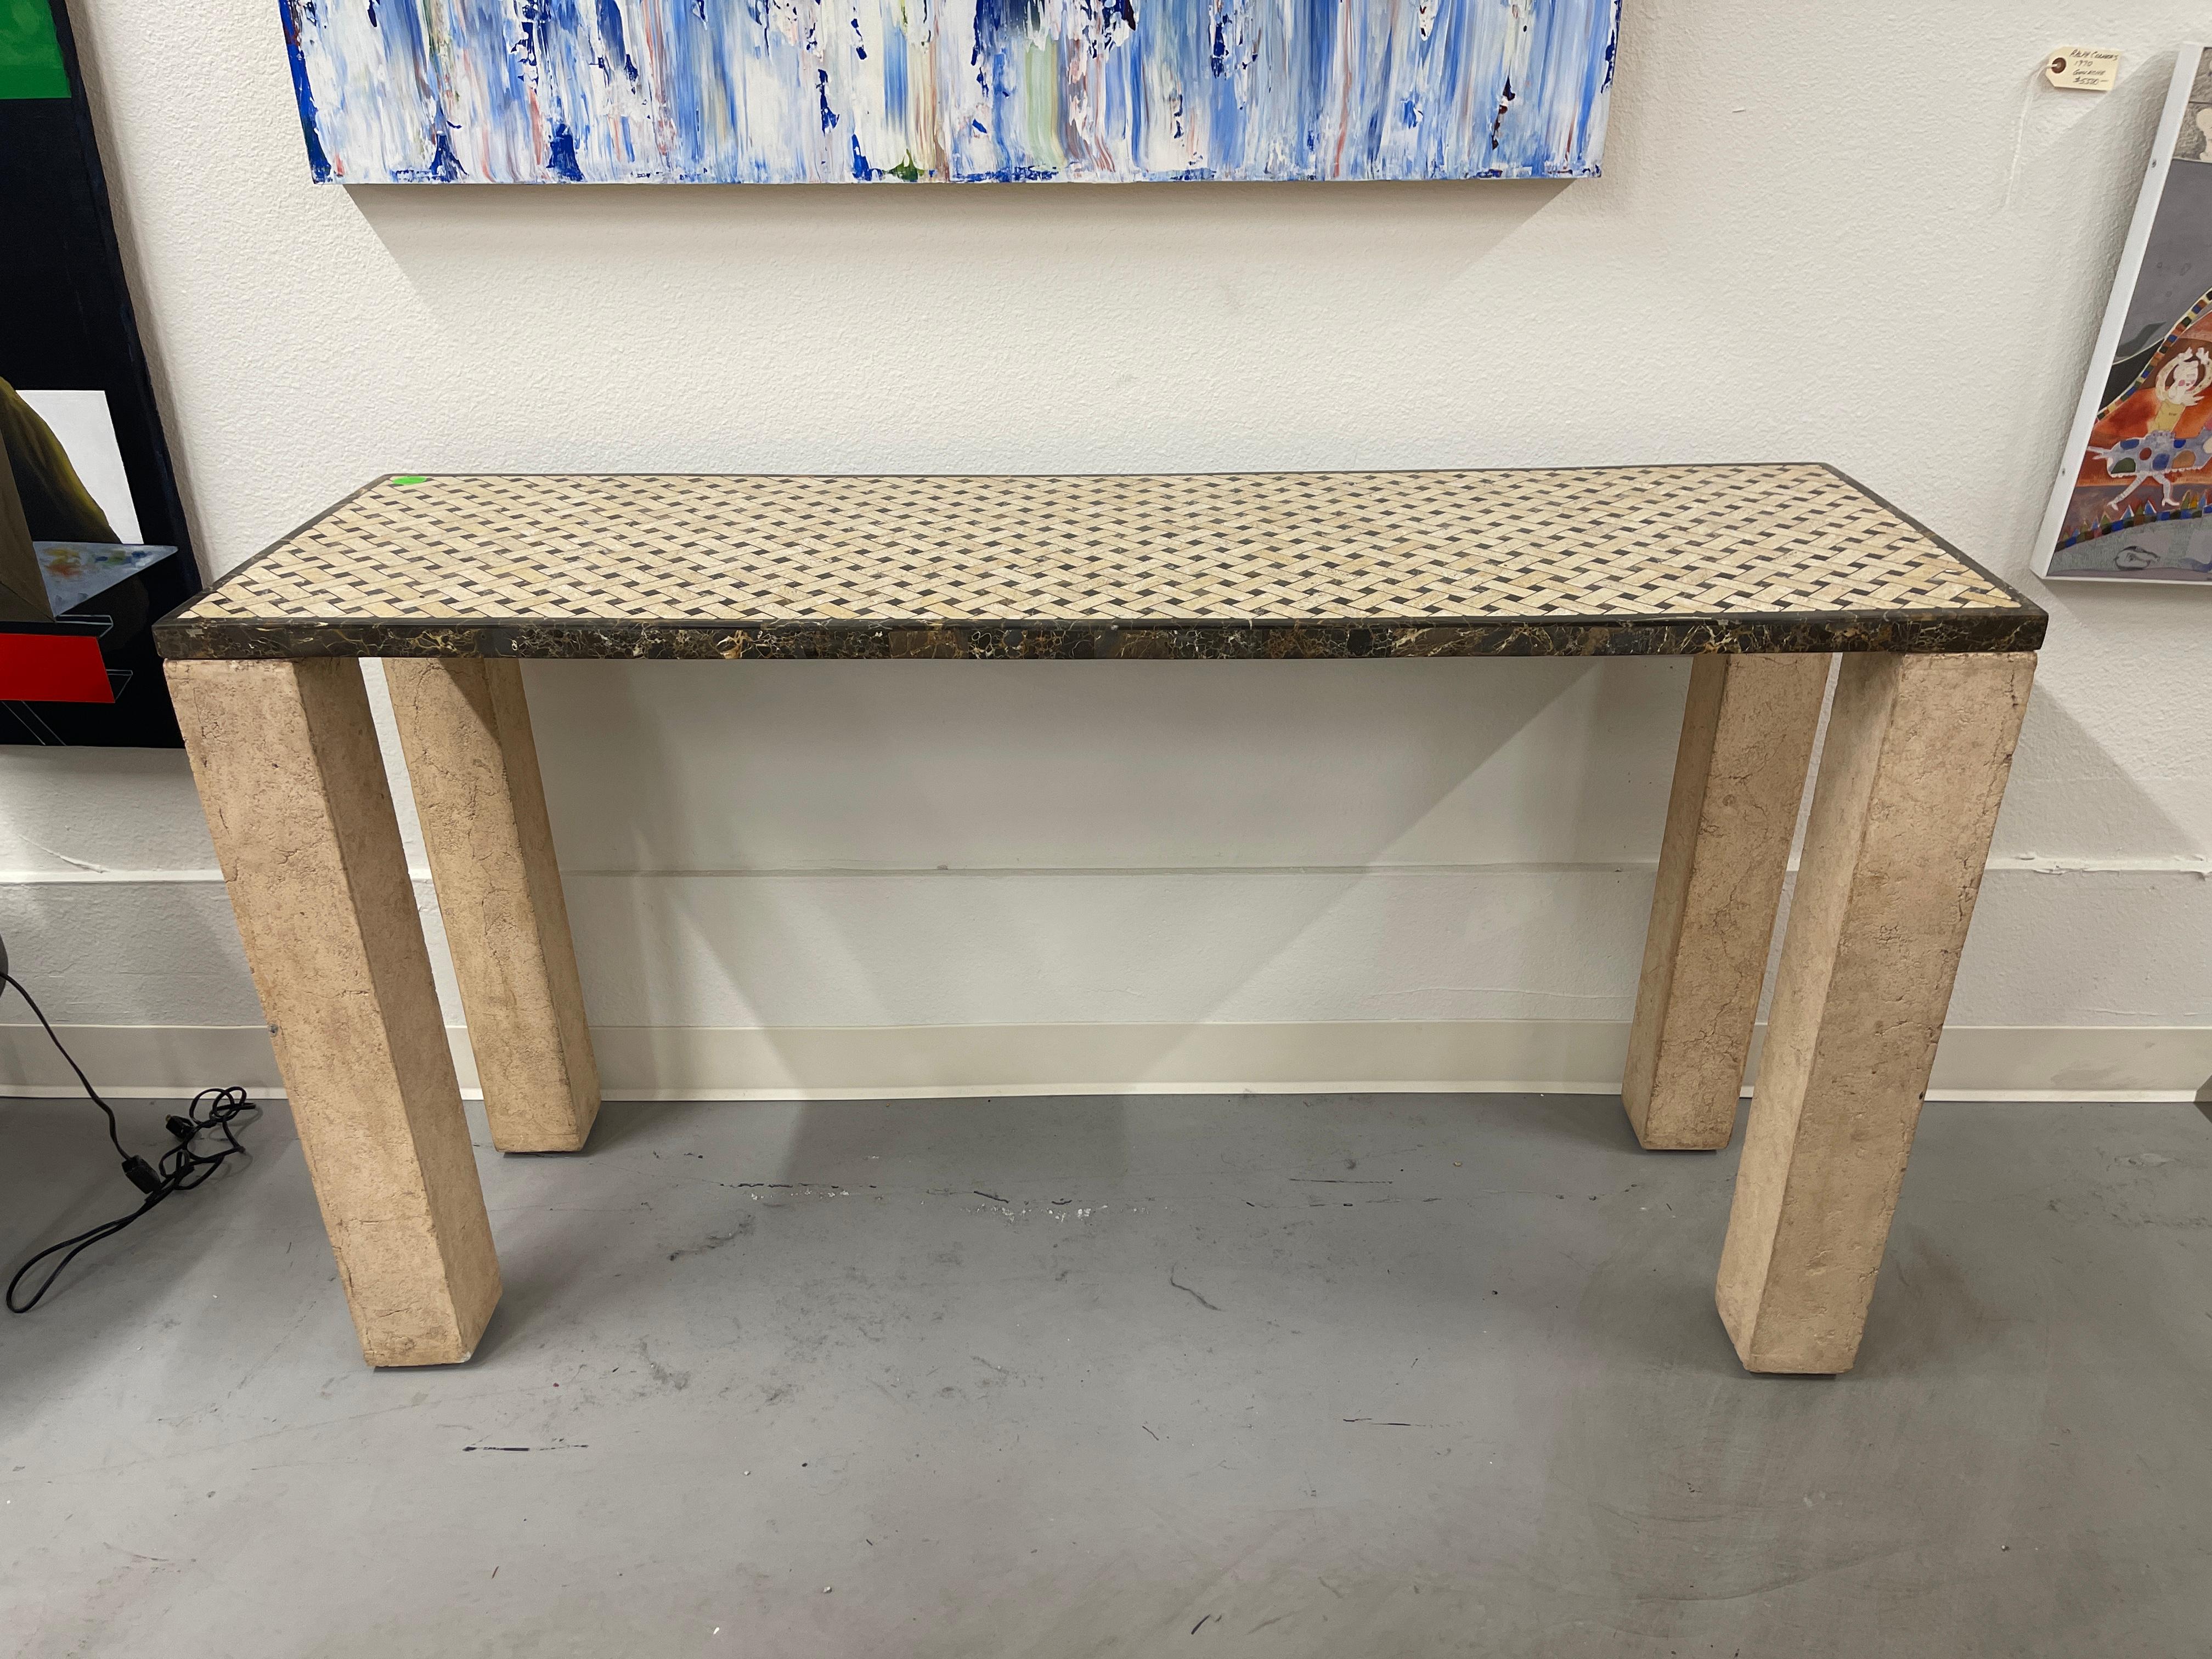 Beautiful basket weave inlaid marble top console with stone legs. Nice color and pattern on top. In good condition, the table has some age and wear most notable to the legs, please see the detailed photos.